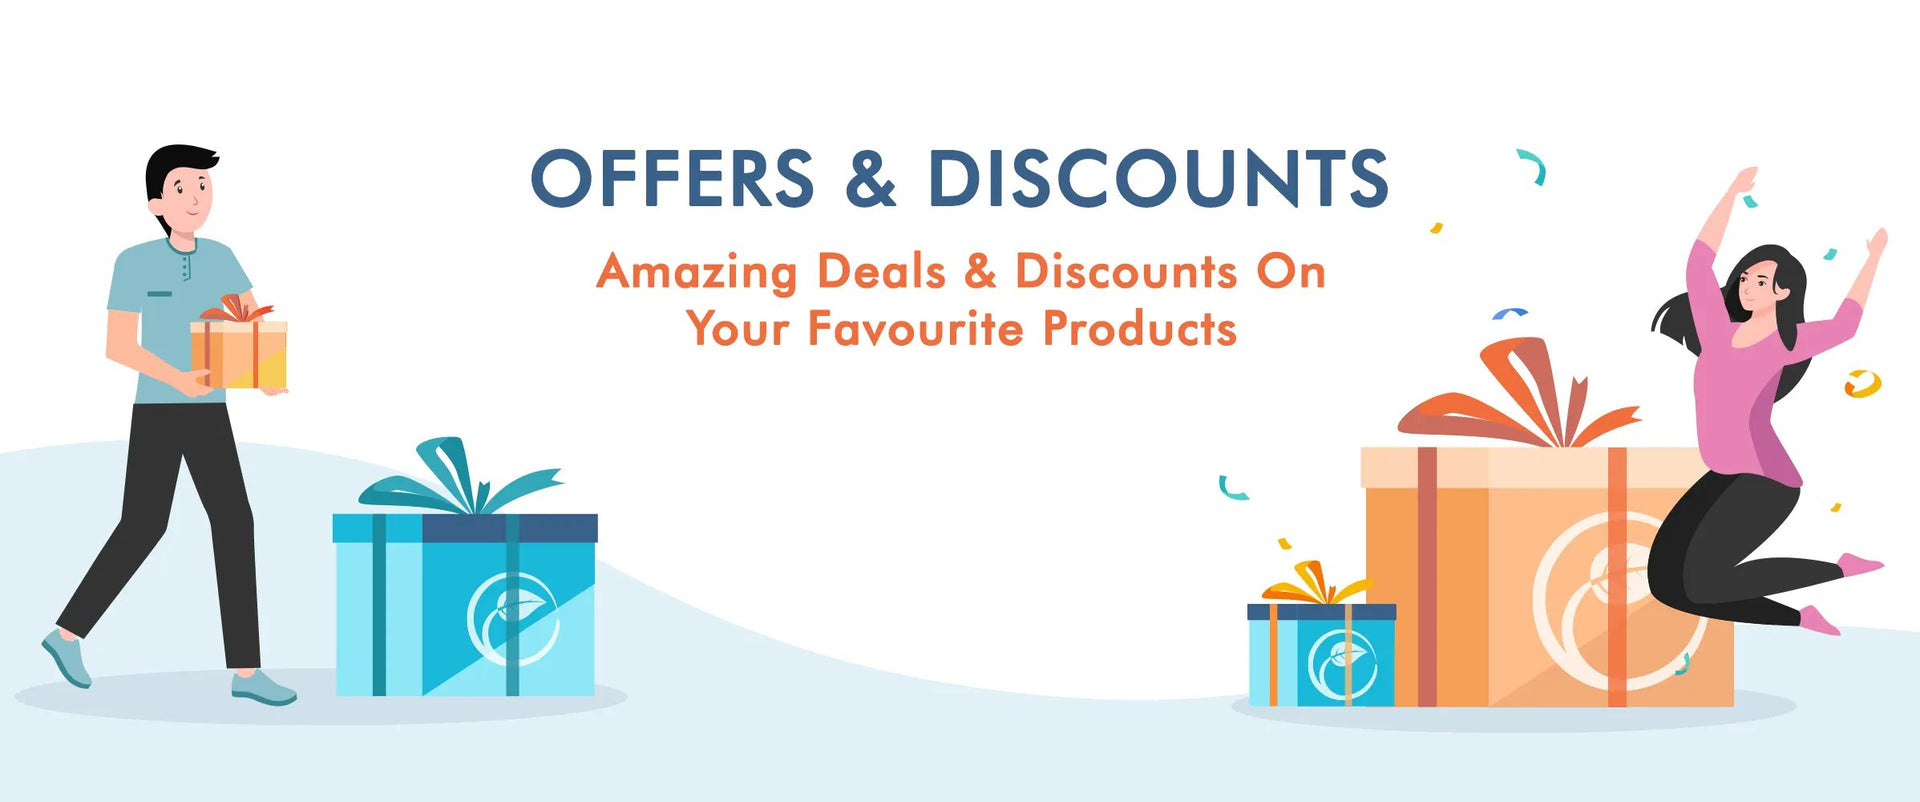 Offers & Discounts